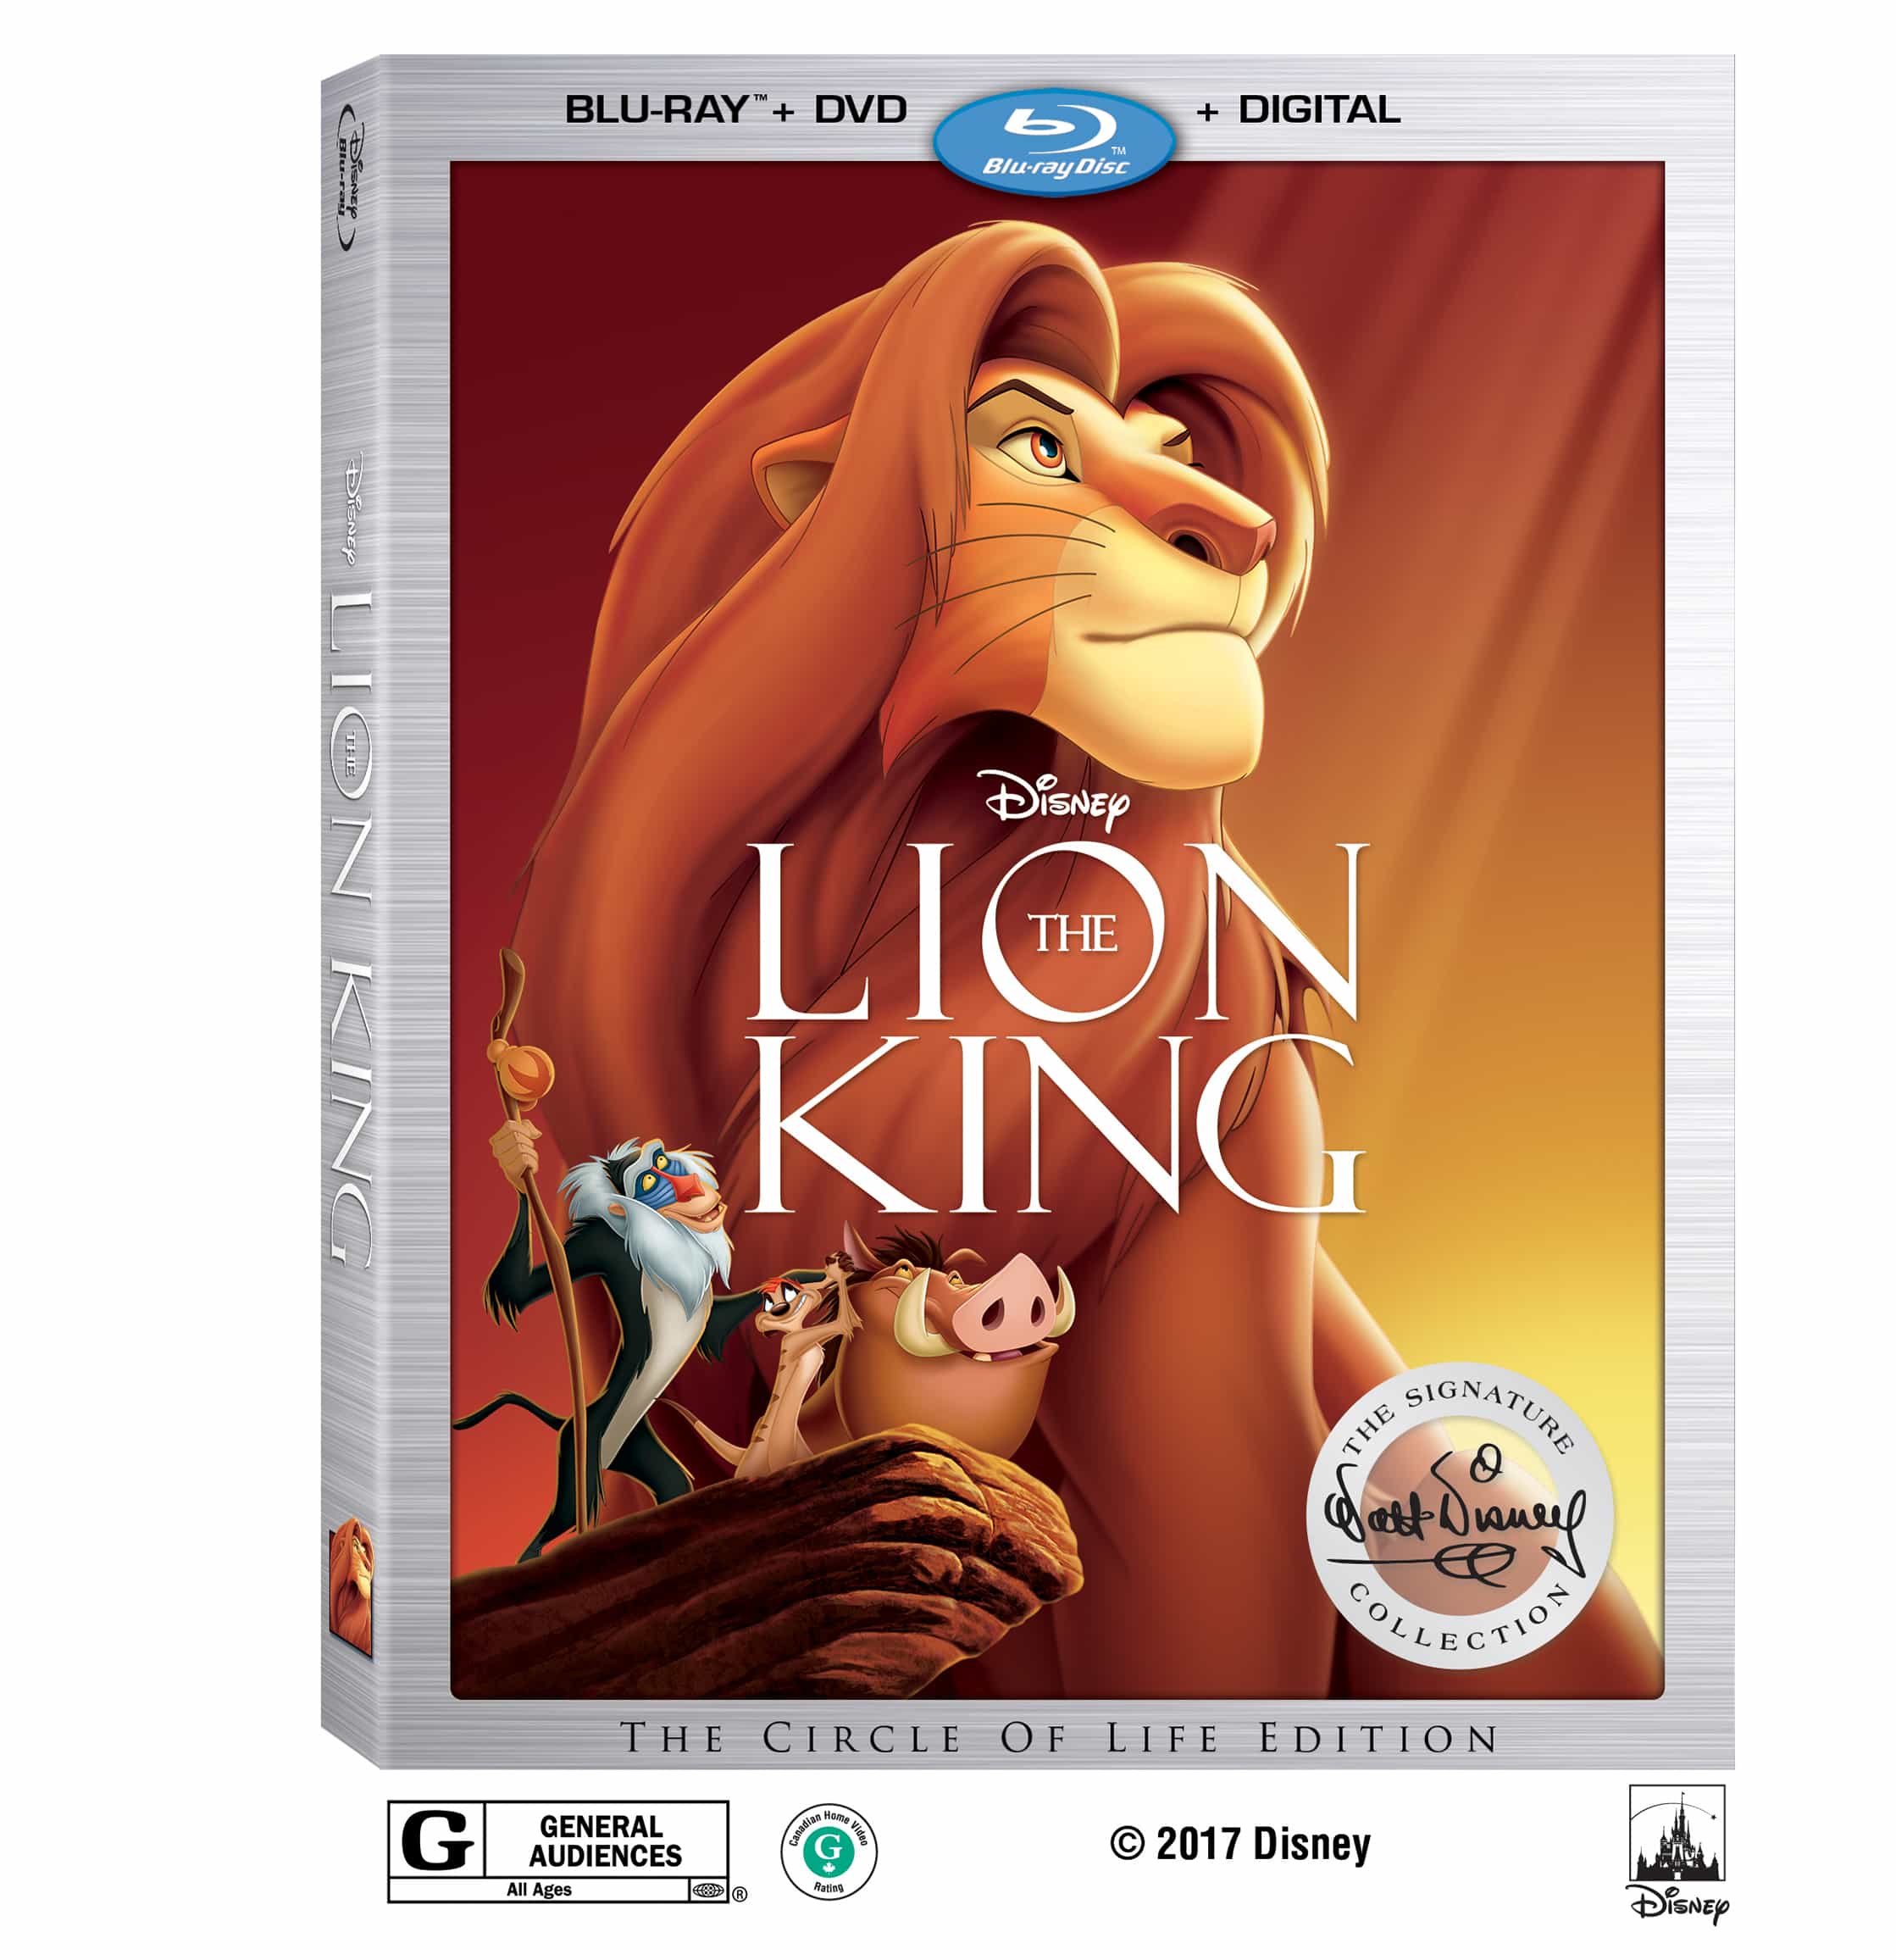 The Lion King Now Available On Digital And Blu-ray With Amazing Bonus Features